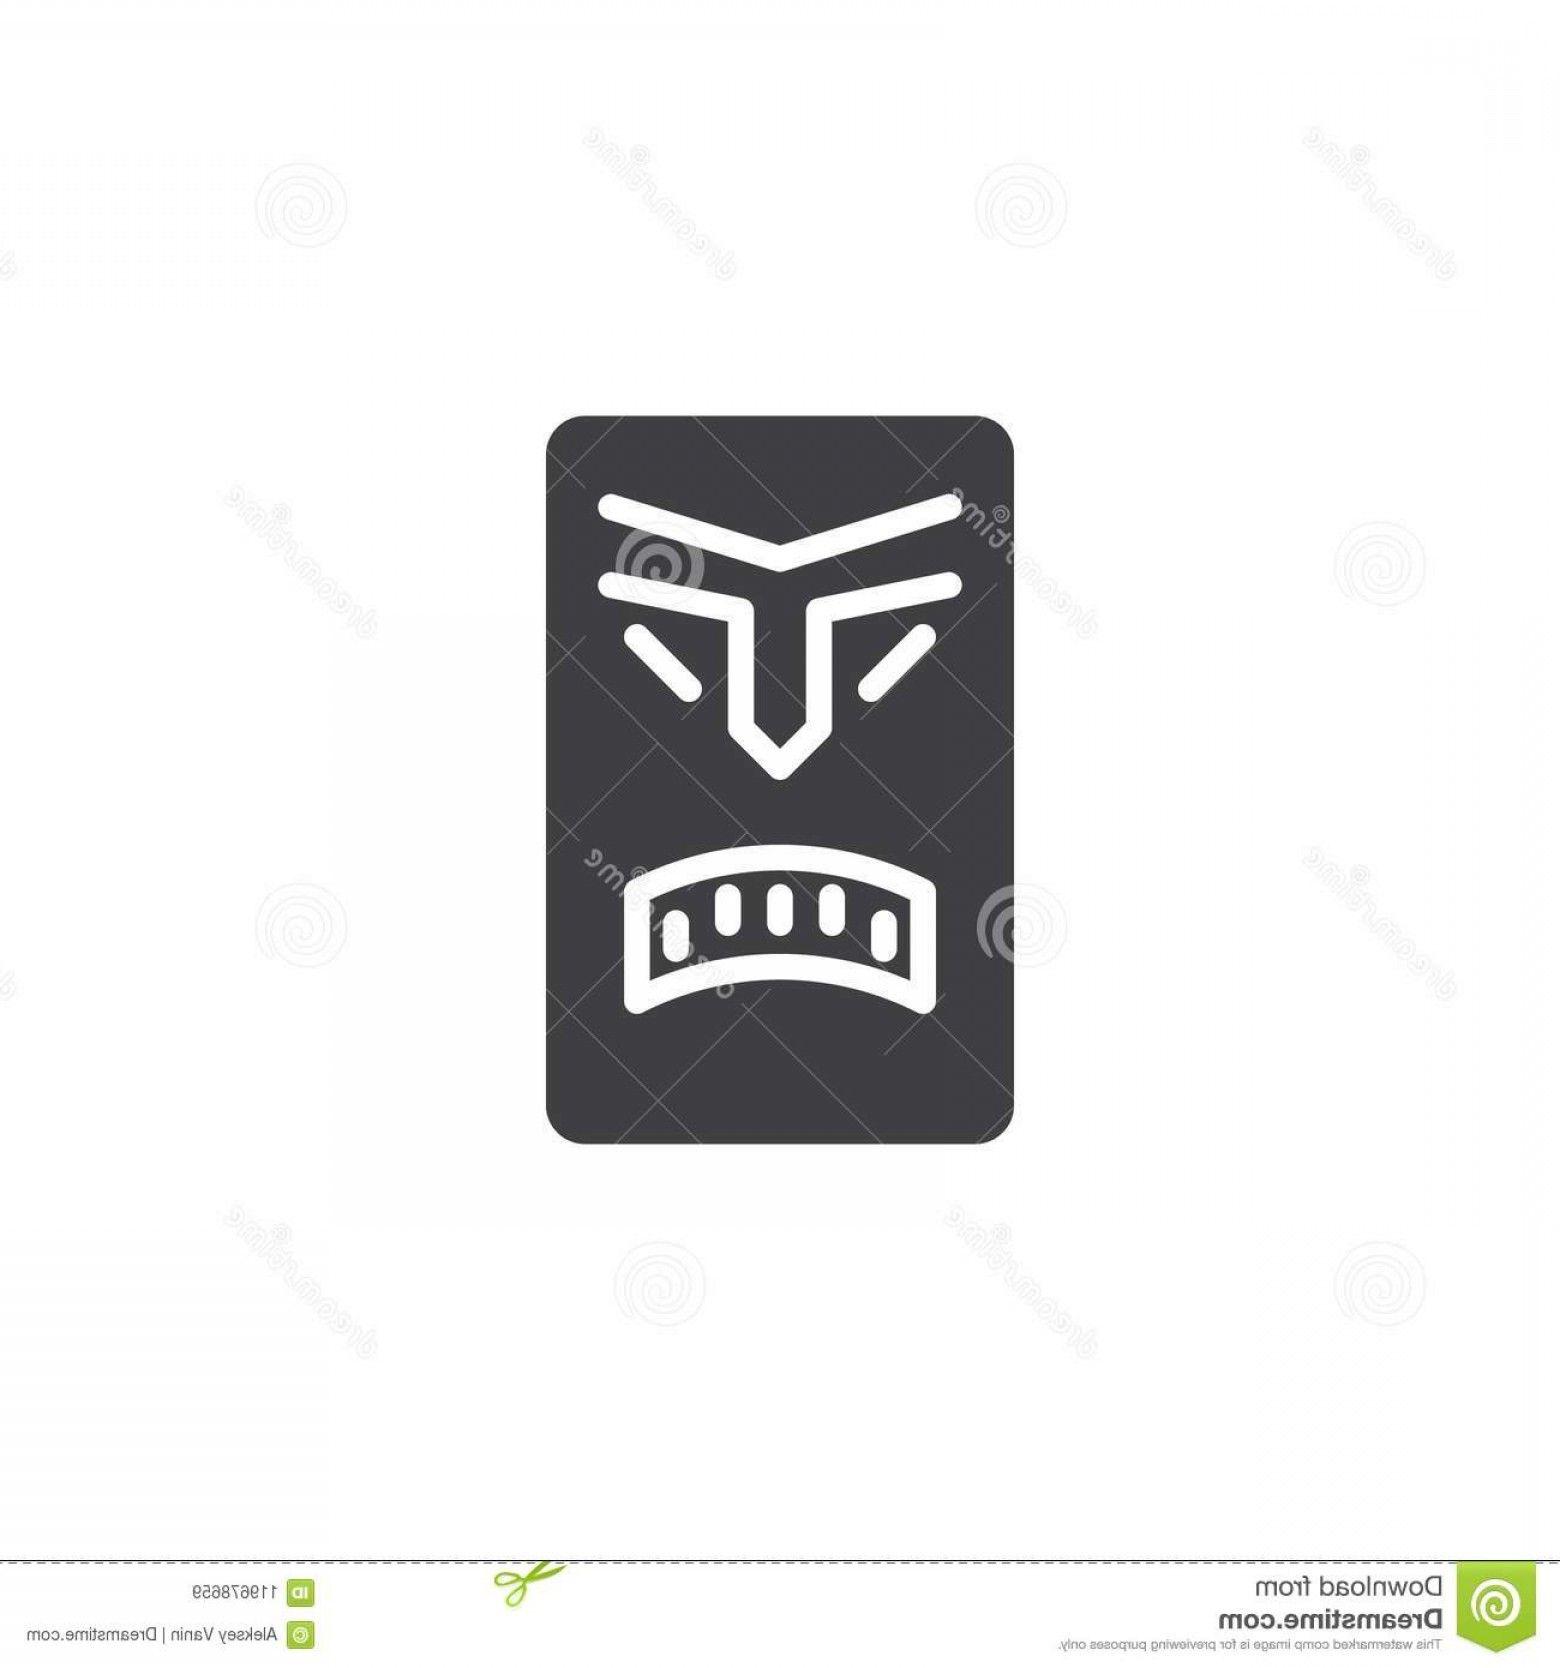 Simple Phone Gray Logo - Tiki Mask Vector Icon Filled Flat Sign Mobile Concept Web Design